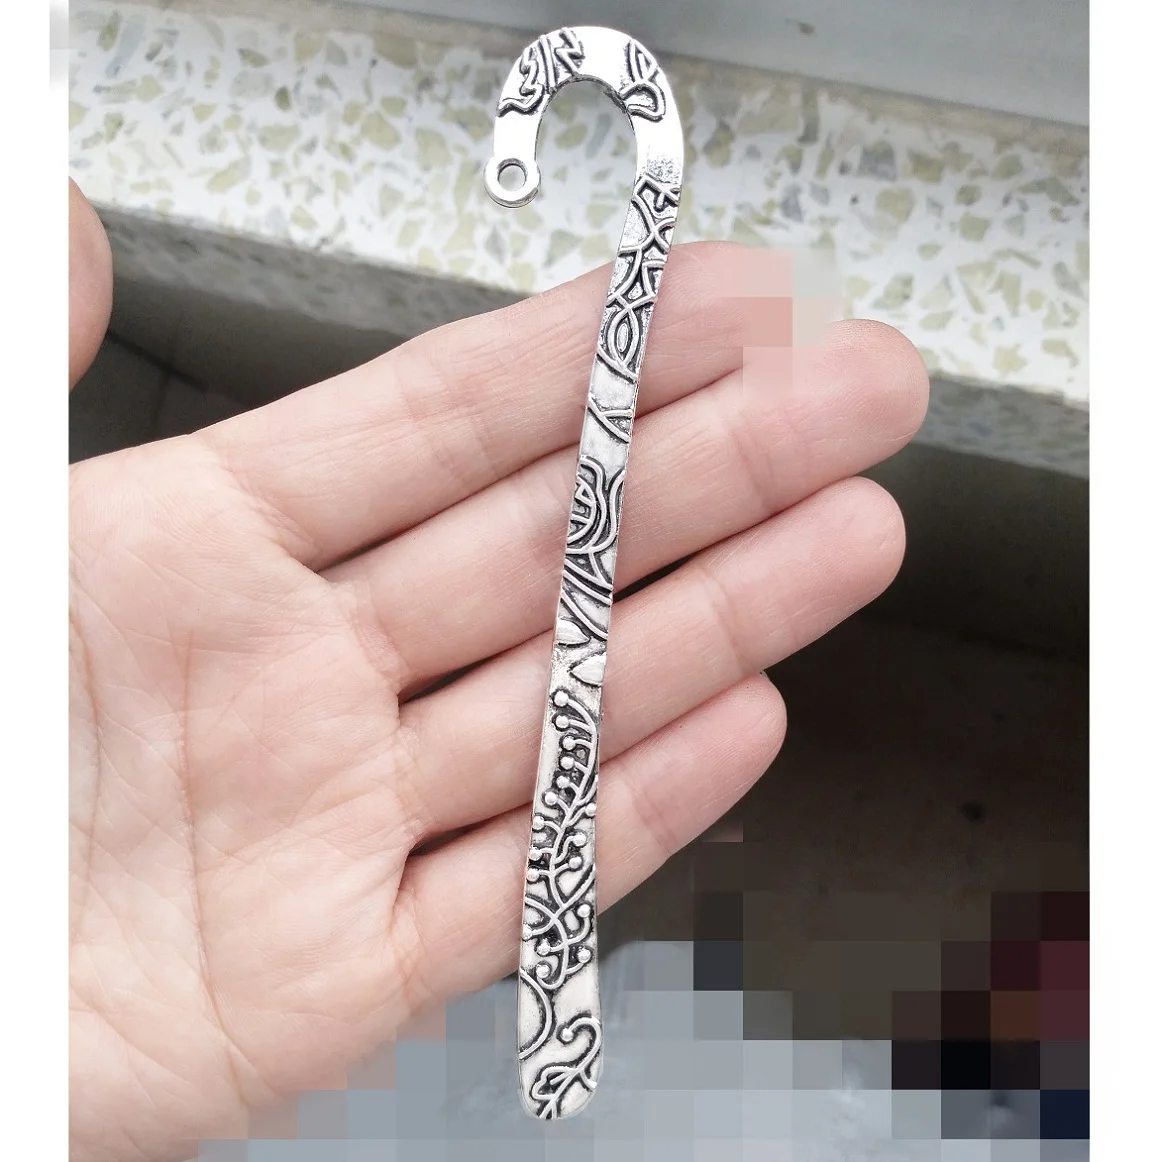 

15pcs/lot bookmarks for books read label plants 120mm long silver alloy diy tassels crafts handmade jewelery stationery supplies